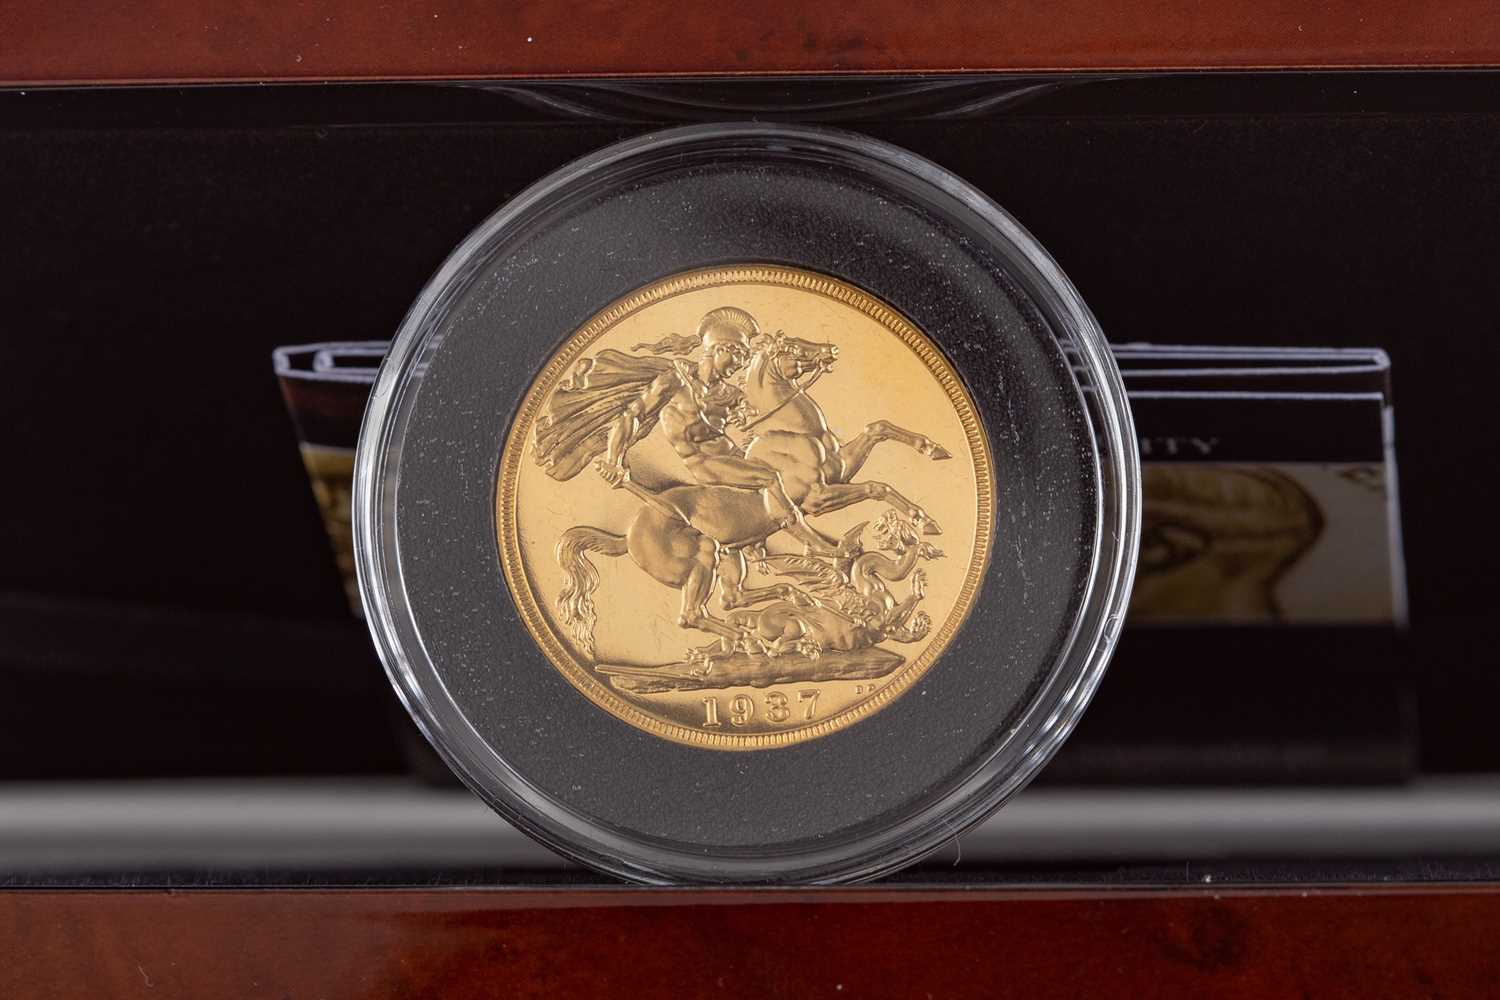 Lot 28 - A RARE GEORGE VI GOLD DOUBLE SOVEREIGN DATED 1937